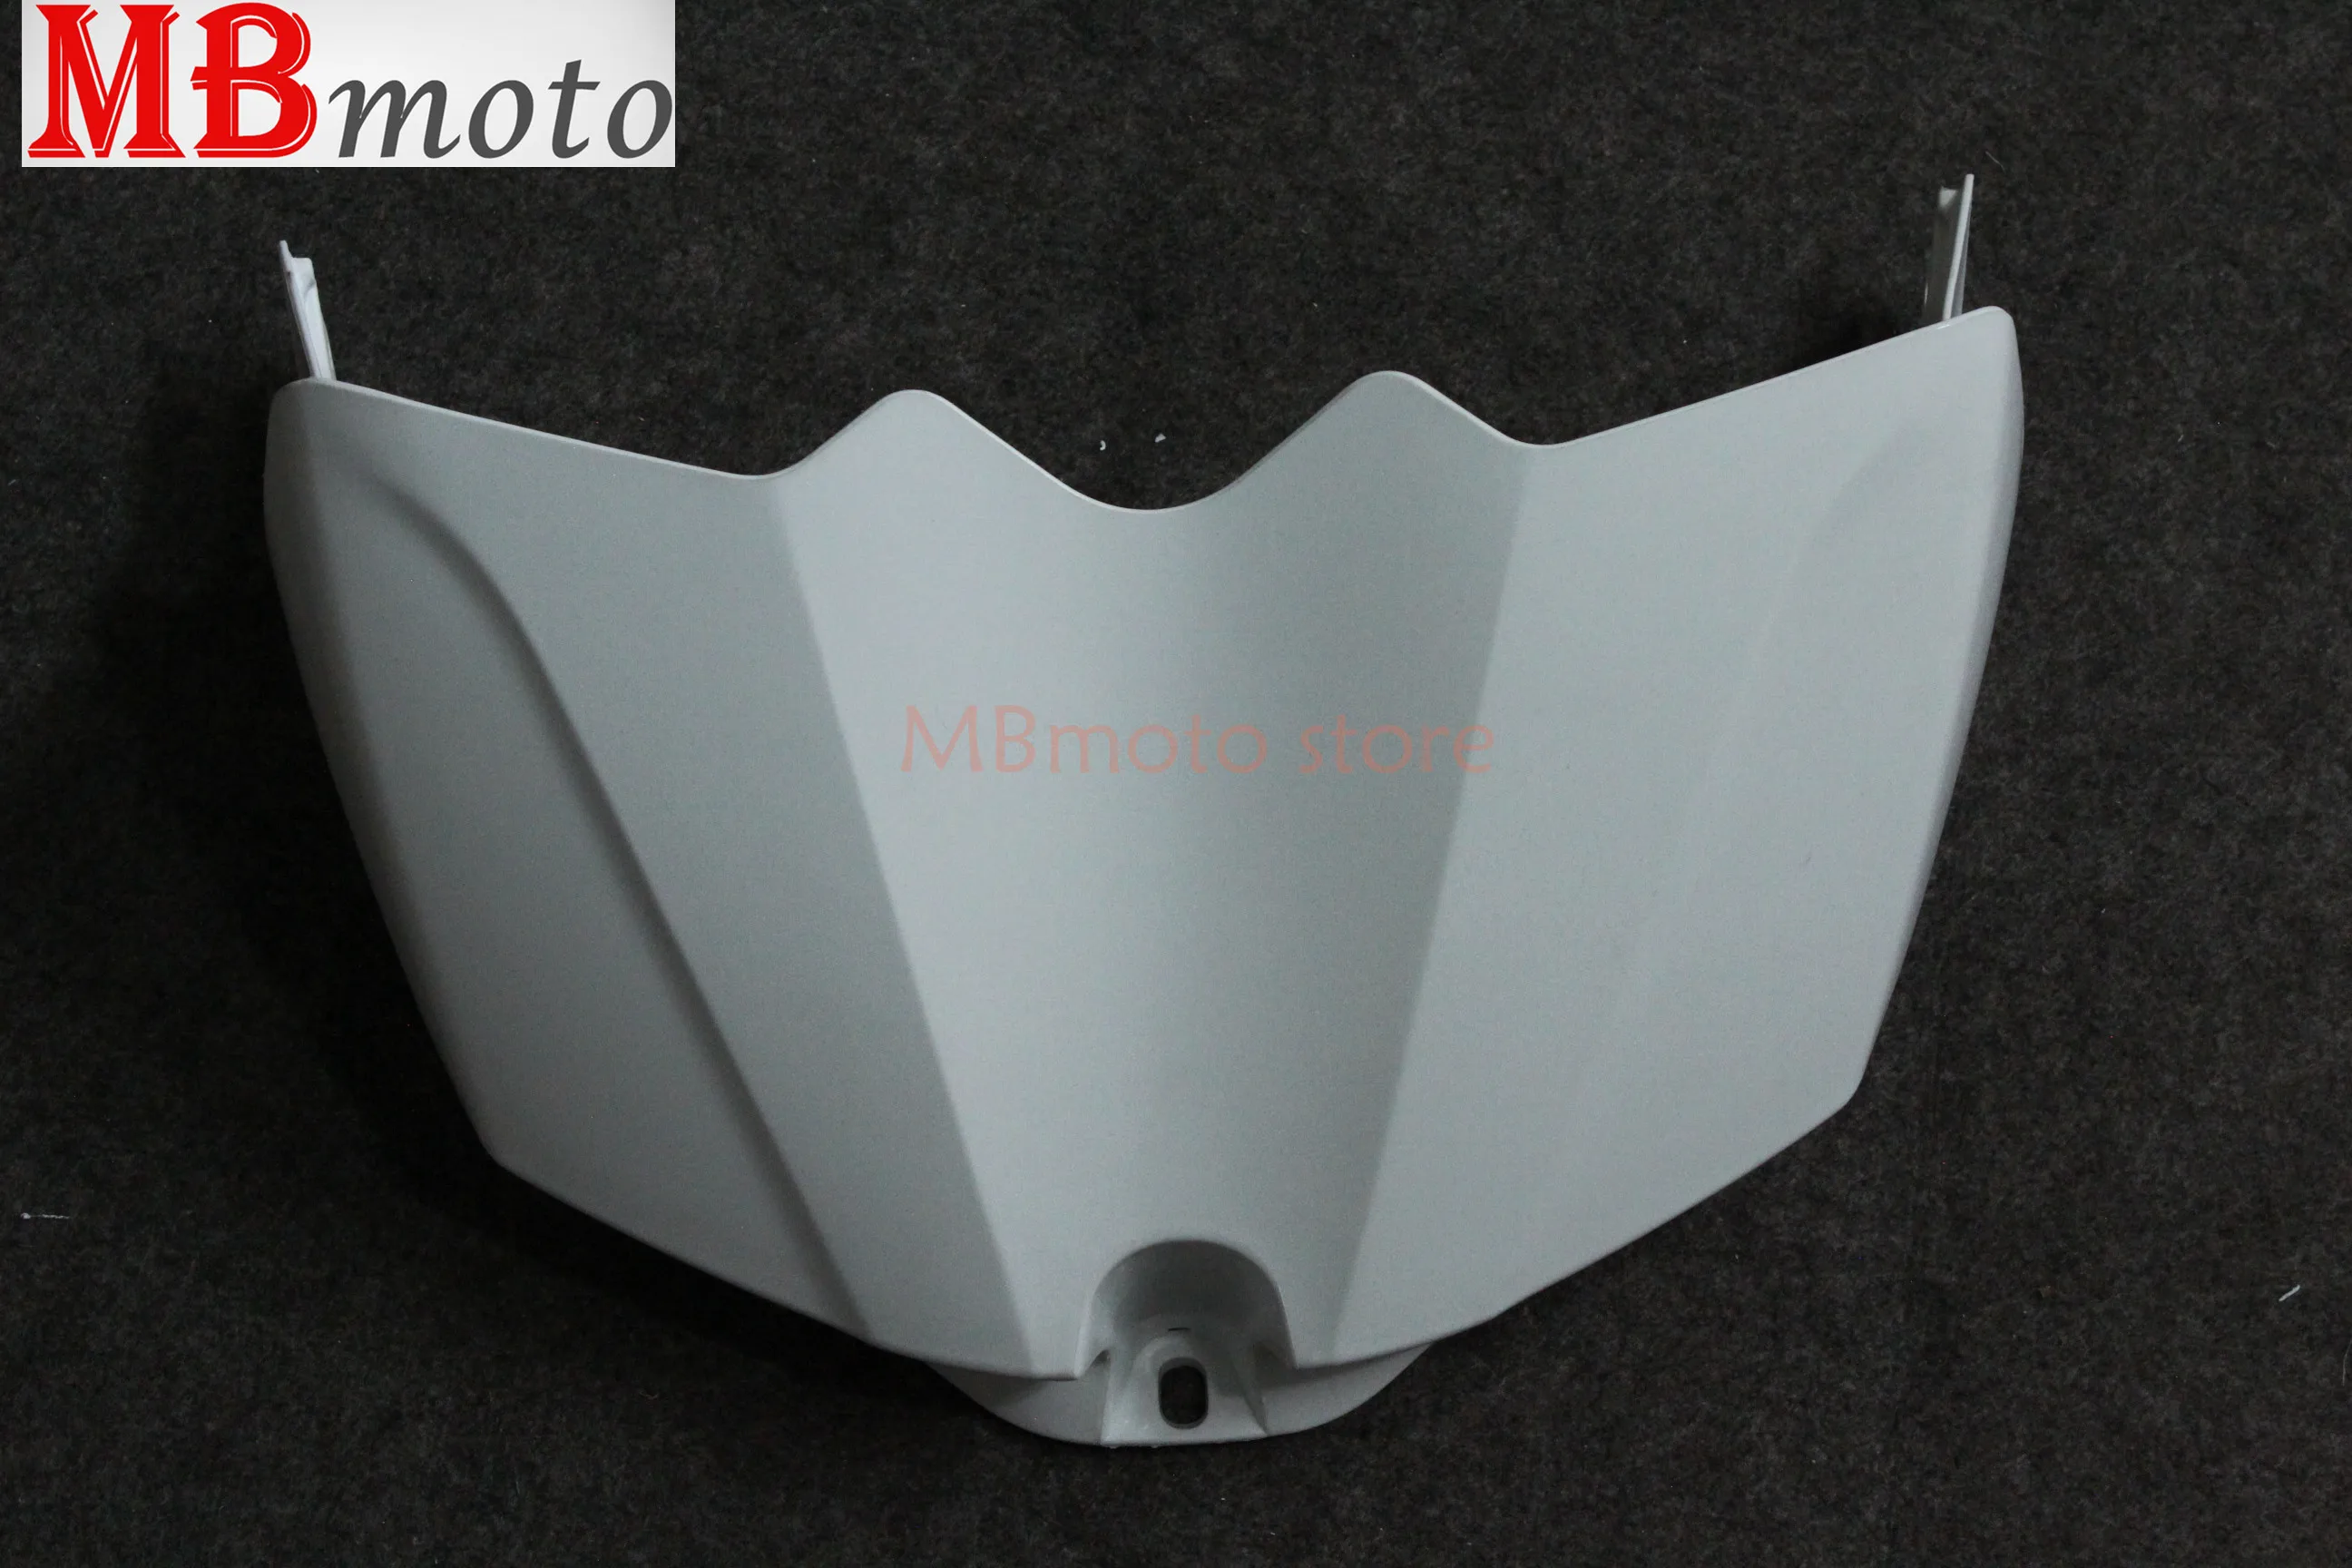 Motorcycle fairing For  YZF1000 07 08 YZF-R1 2007 2008  Motorbike Moto Gas Fuel Tank Cover Injection Fairings